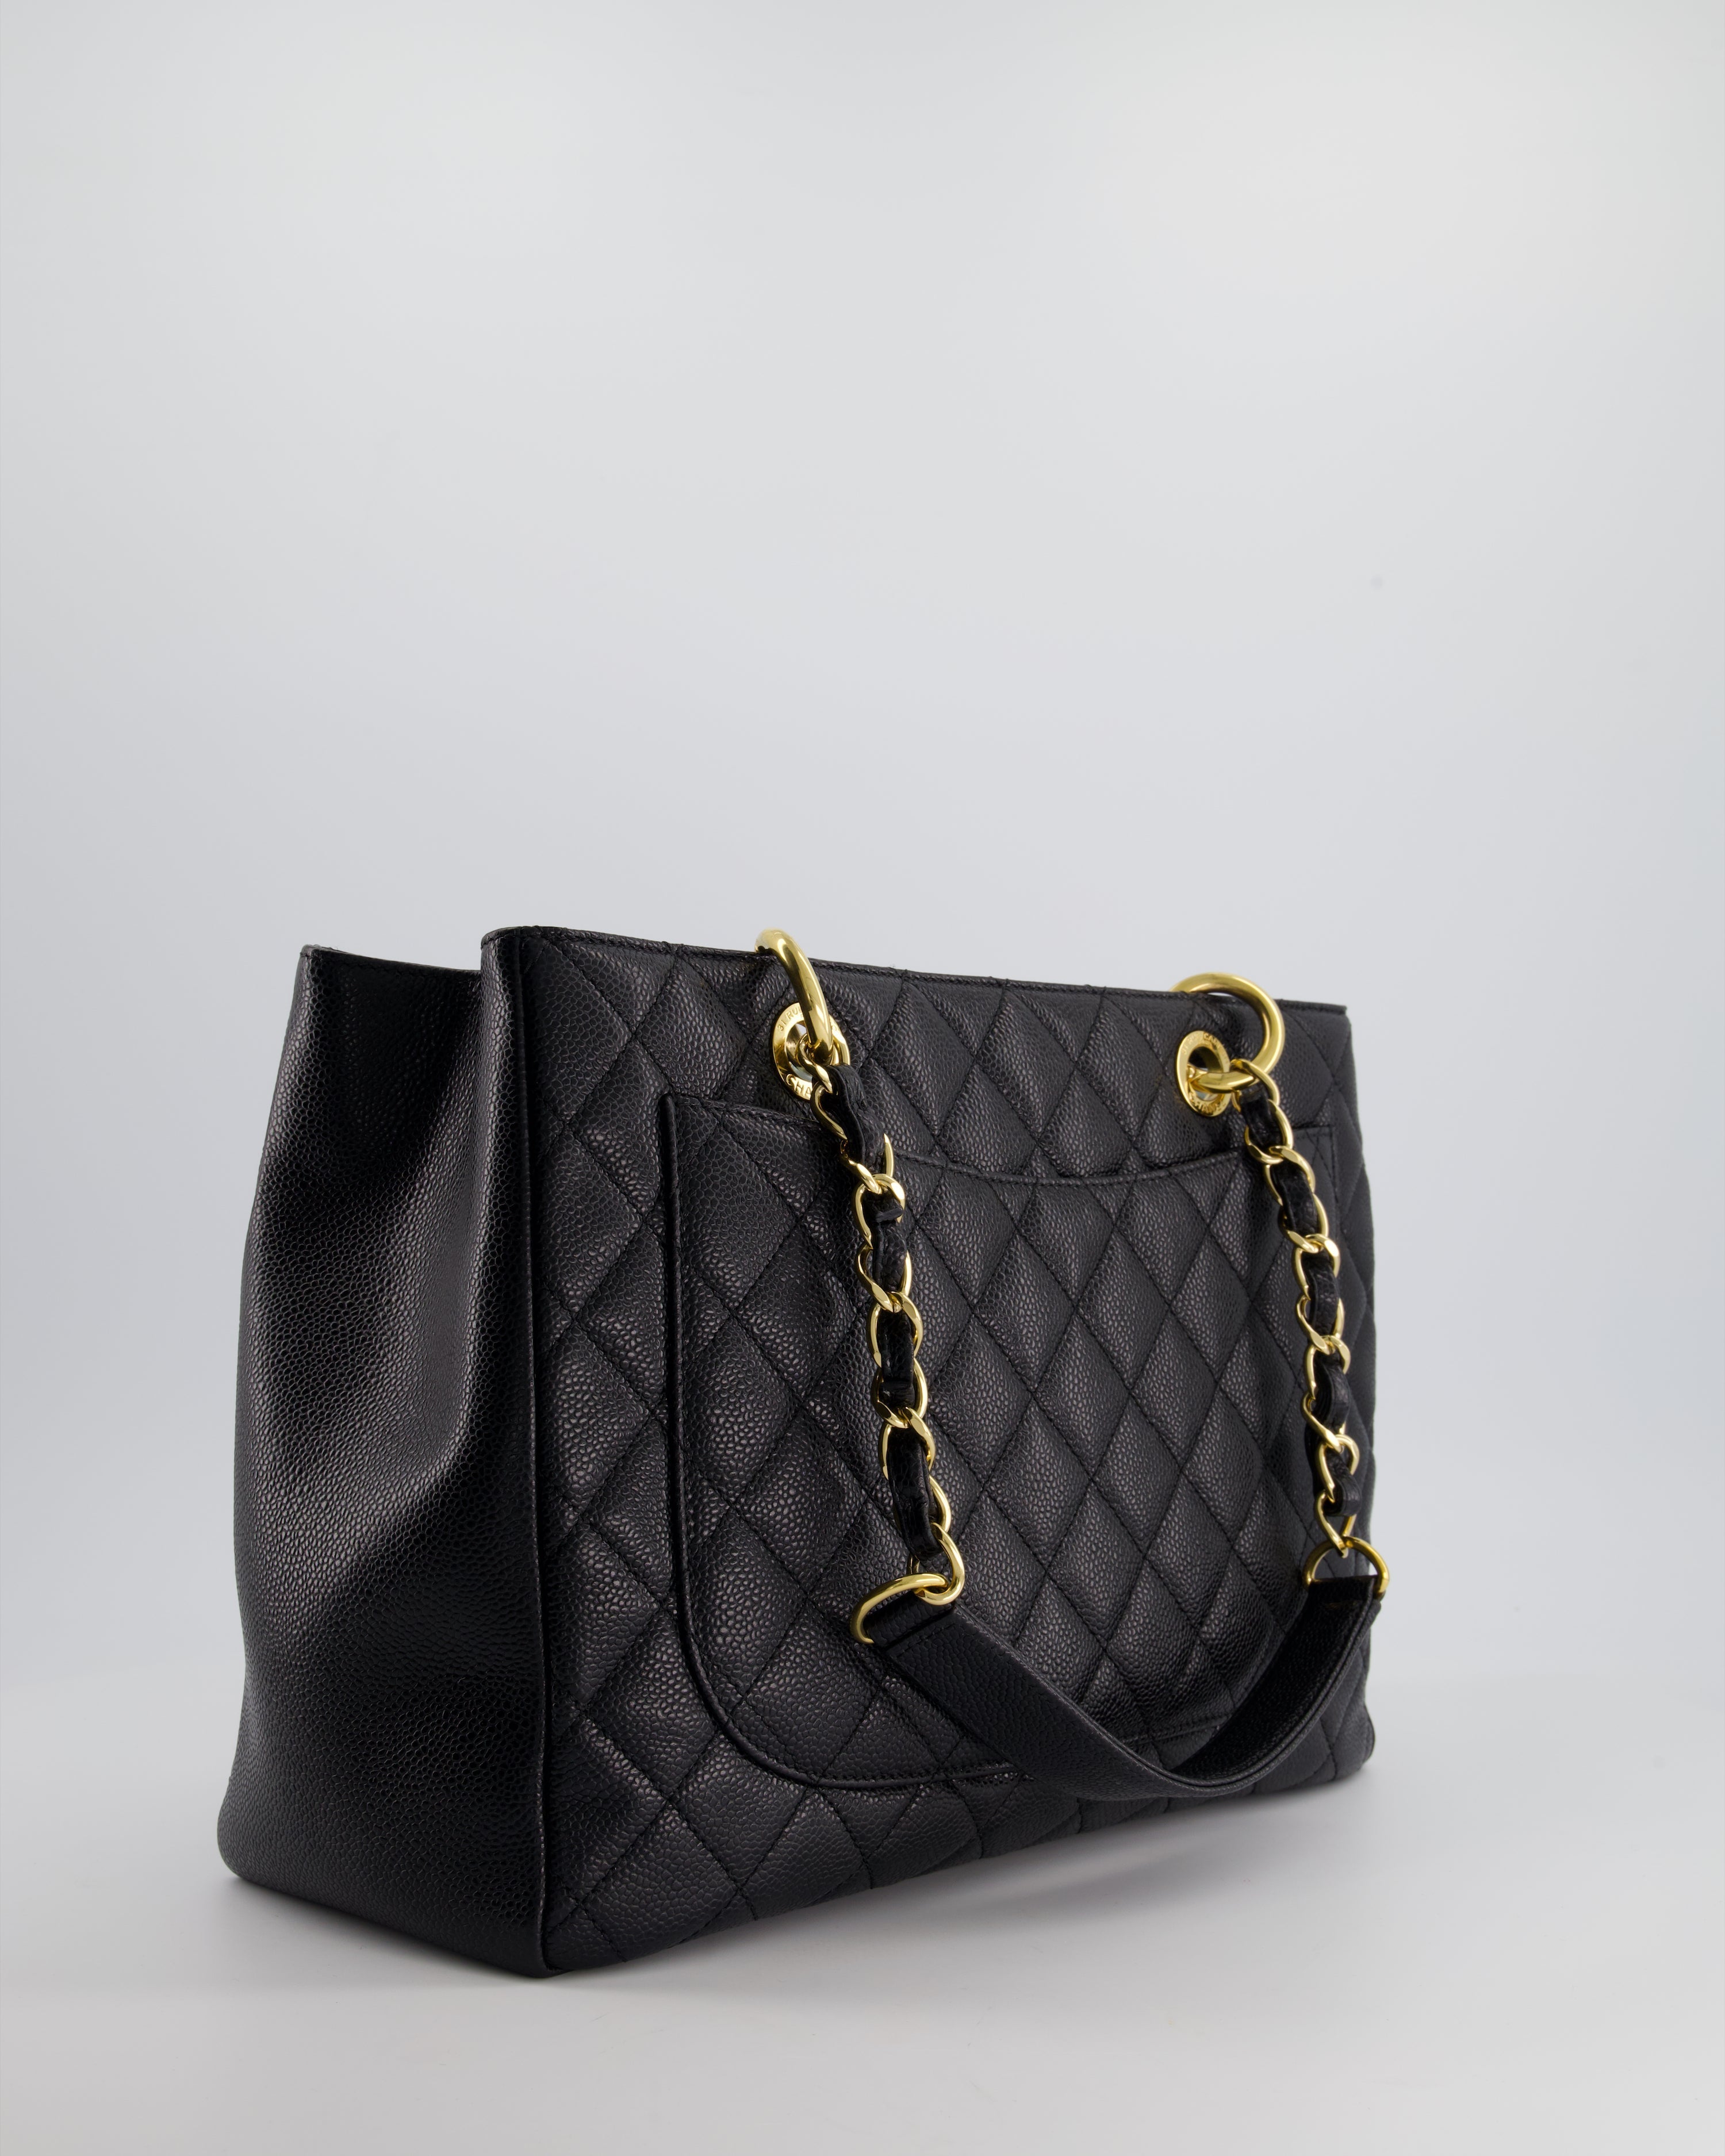 Chanel Black Caviar GST Tote Bag with Gold Hardware